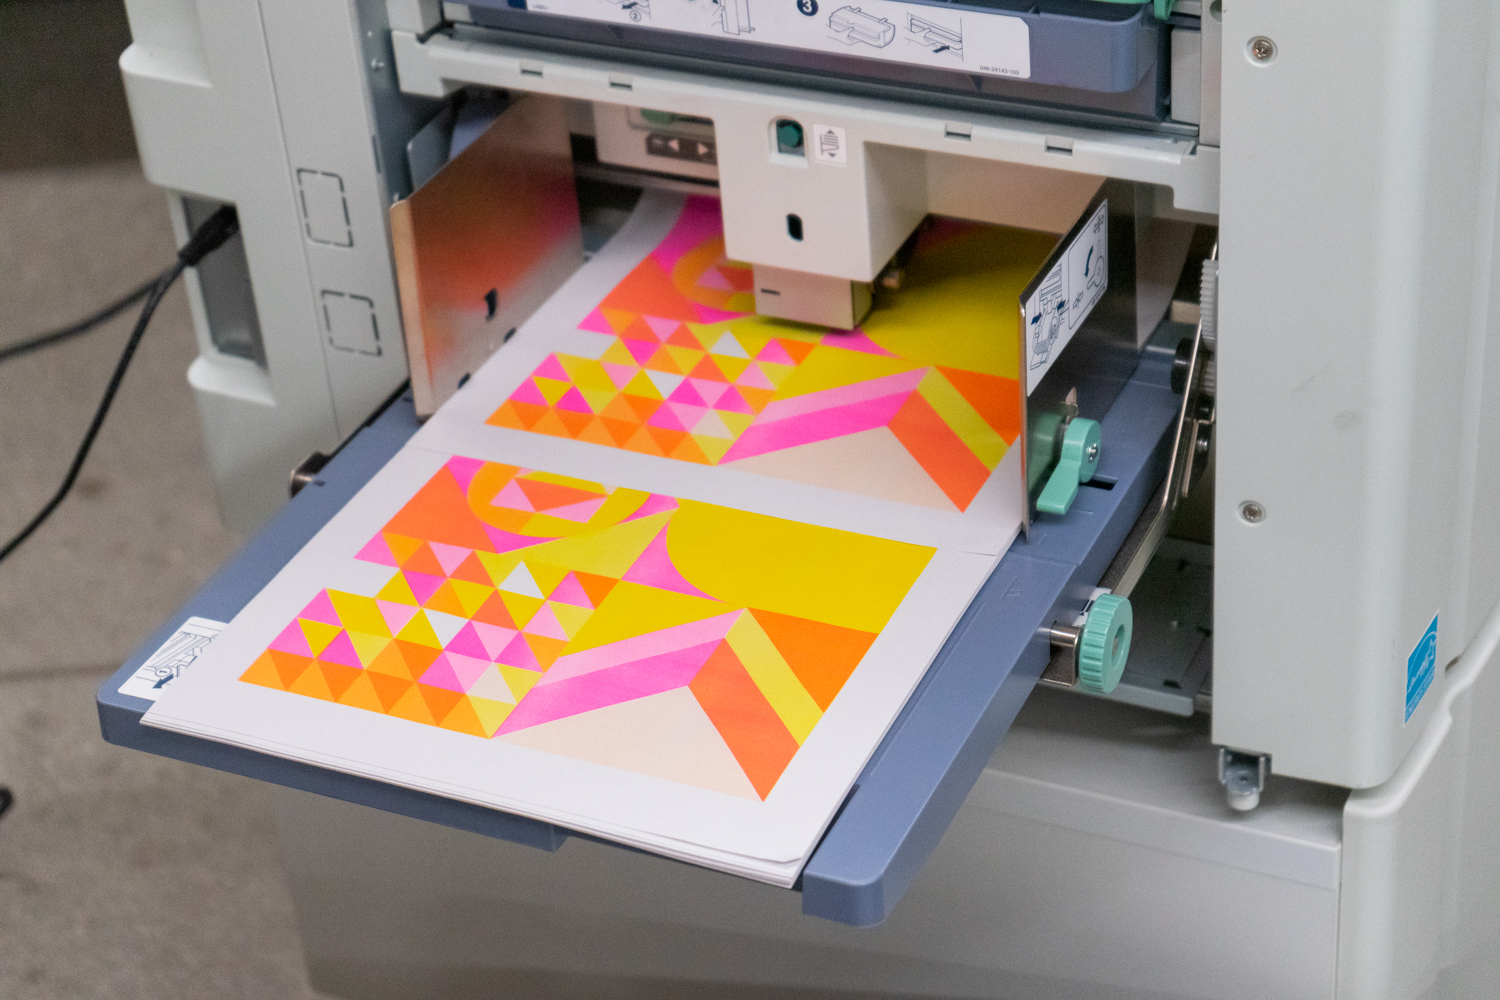 A print with a pink orange and yellow geometric design sits in a risograph tray